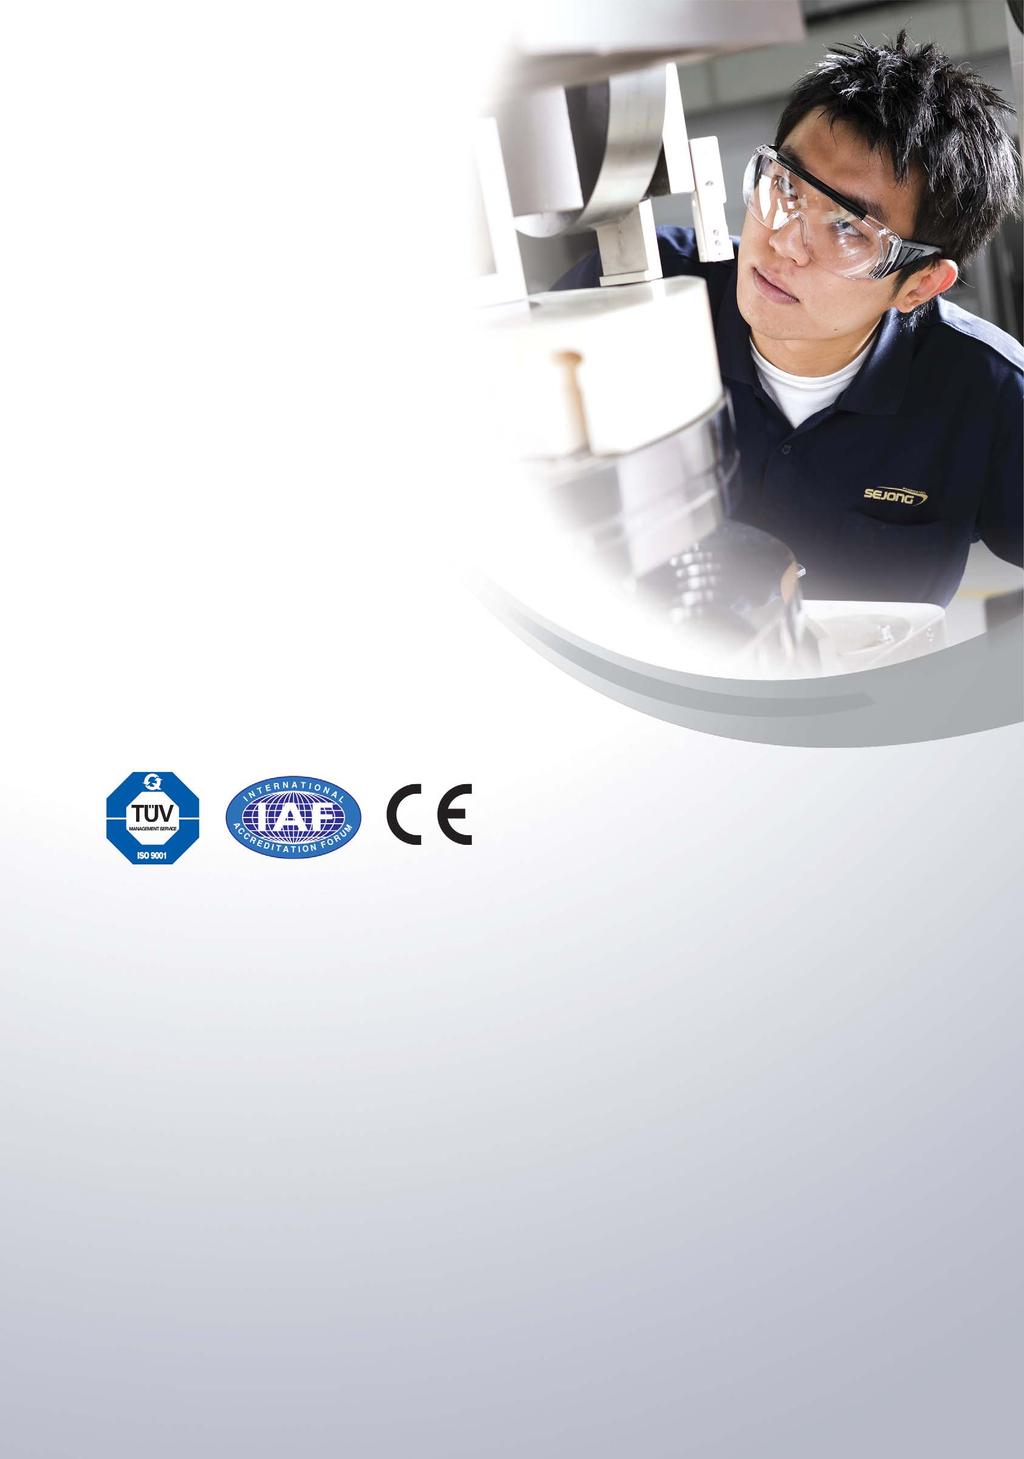 Quality Assurance Sejong Pharmatech has 20 years of accumulated know-how and its innovative strides